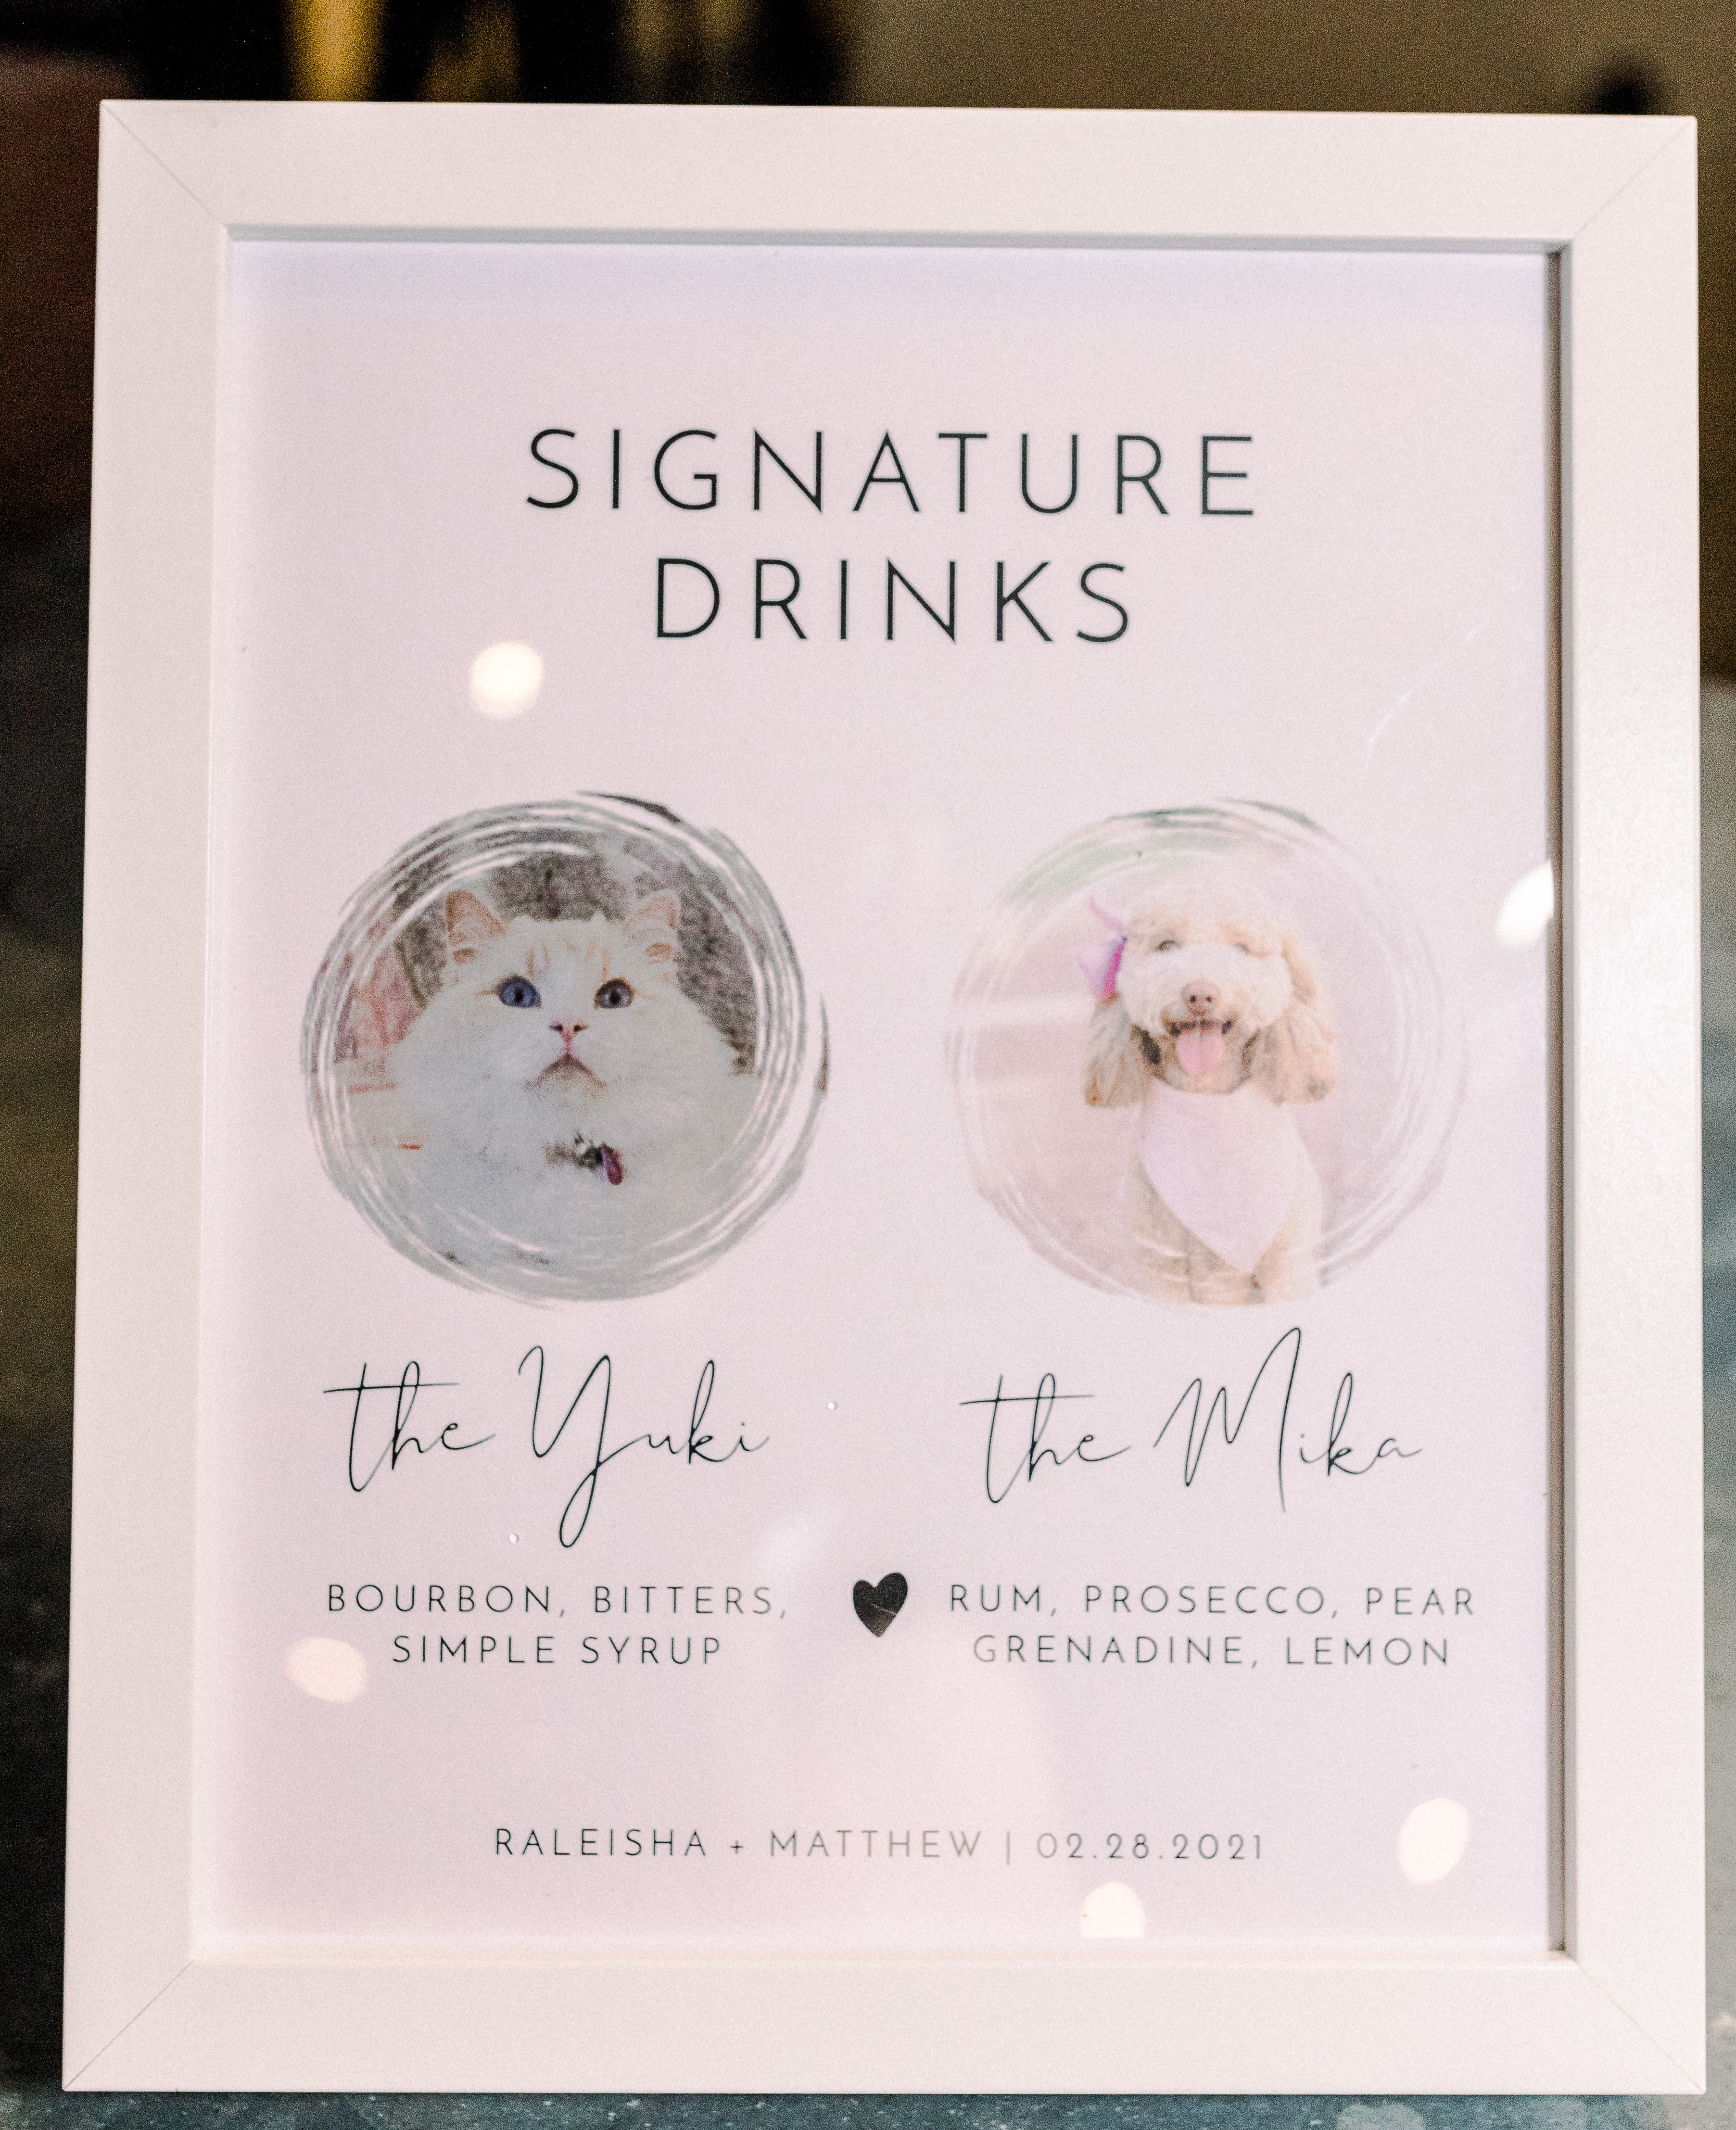 A signature cocktail sign that shows the bride and groom's pets with drinks inspired by them.